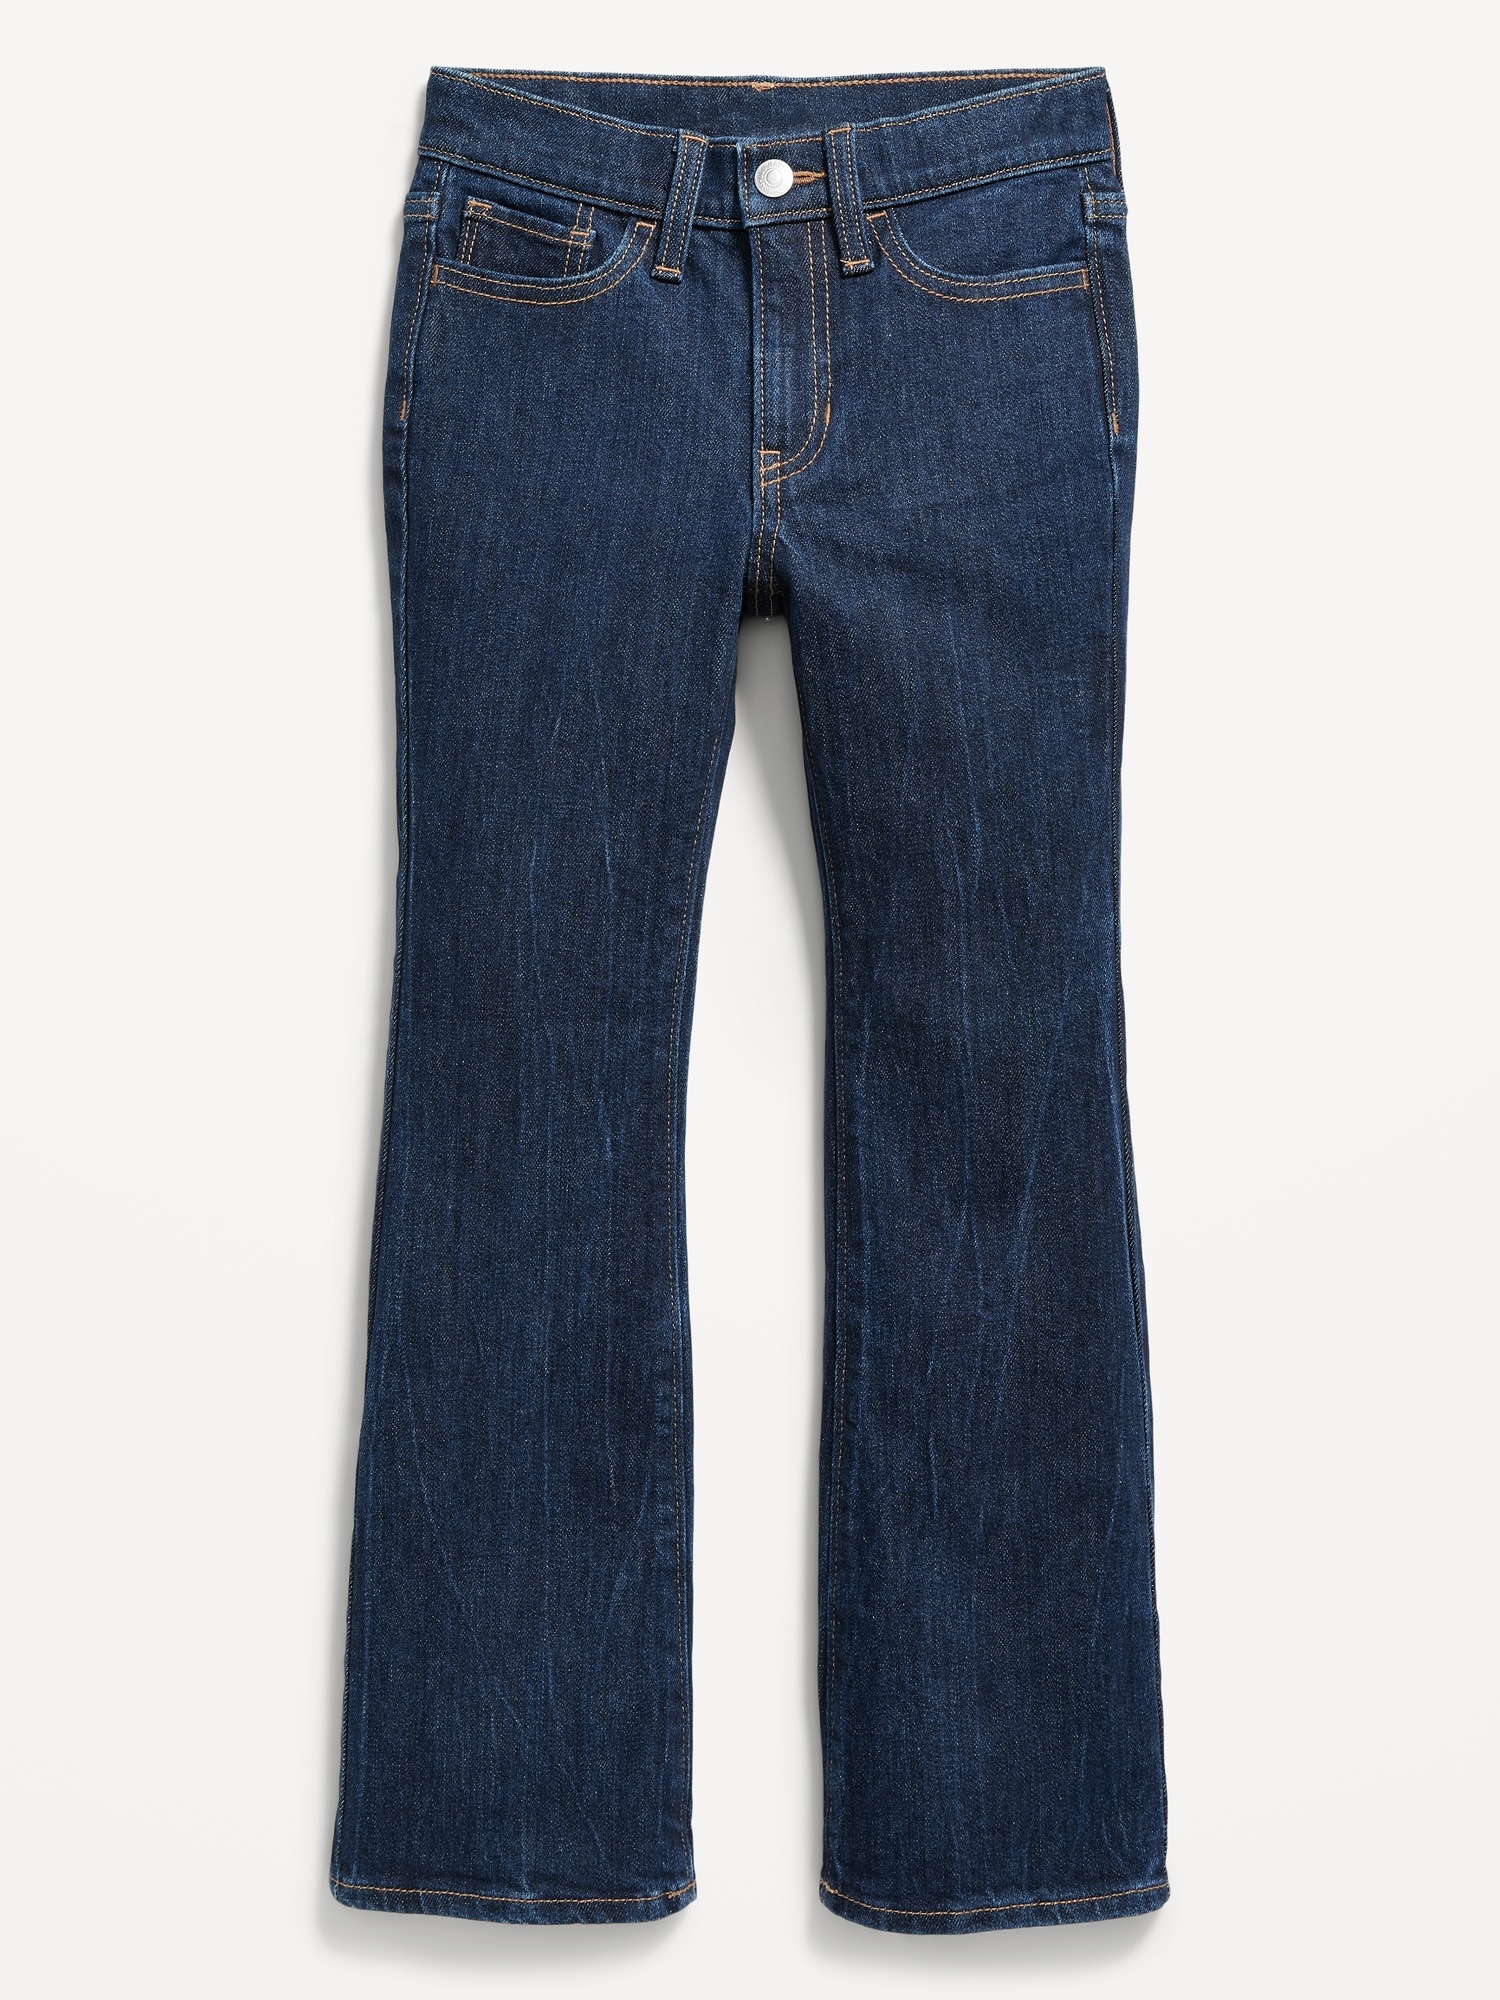 Built-In Tough High-Waisted Flare Jeans for Girls